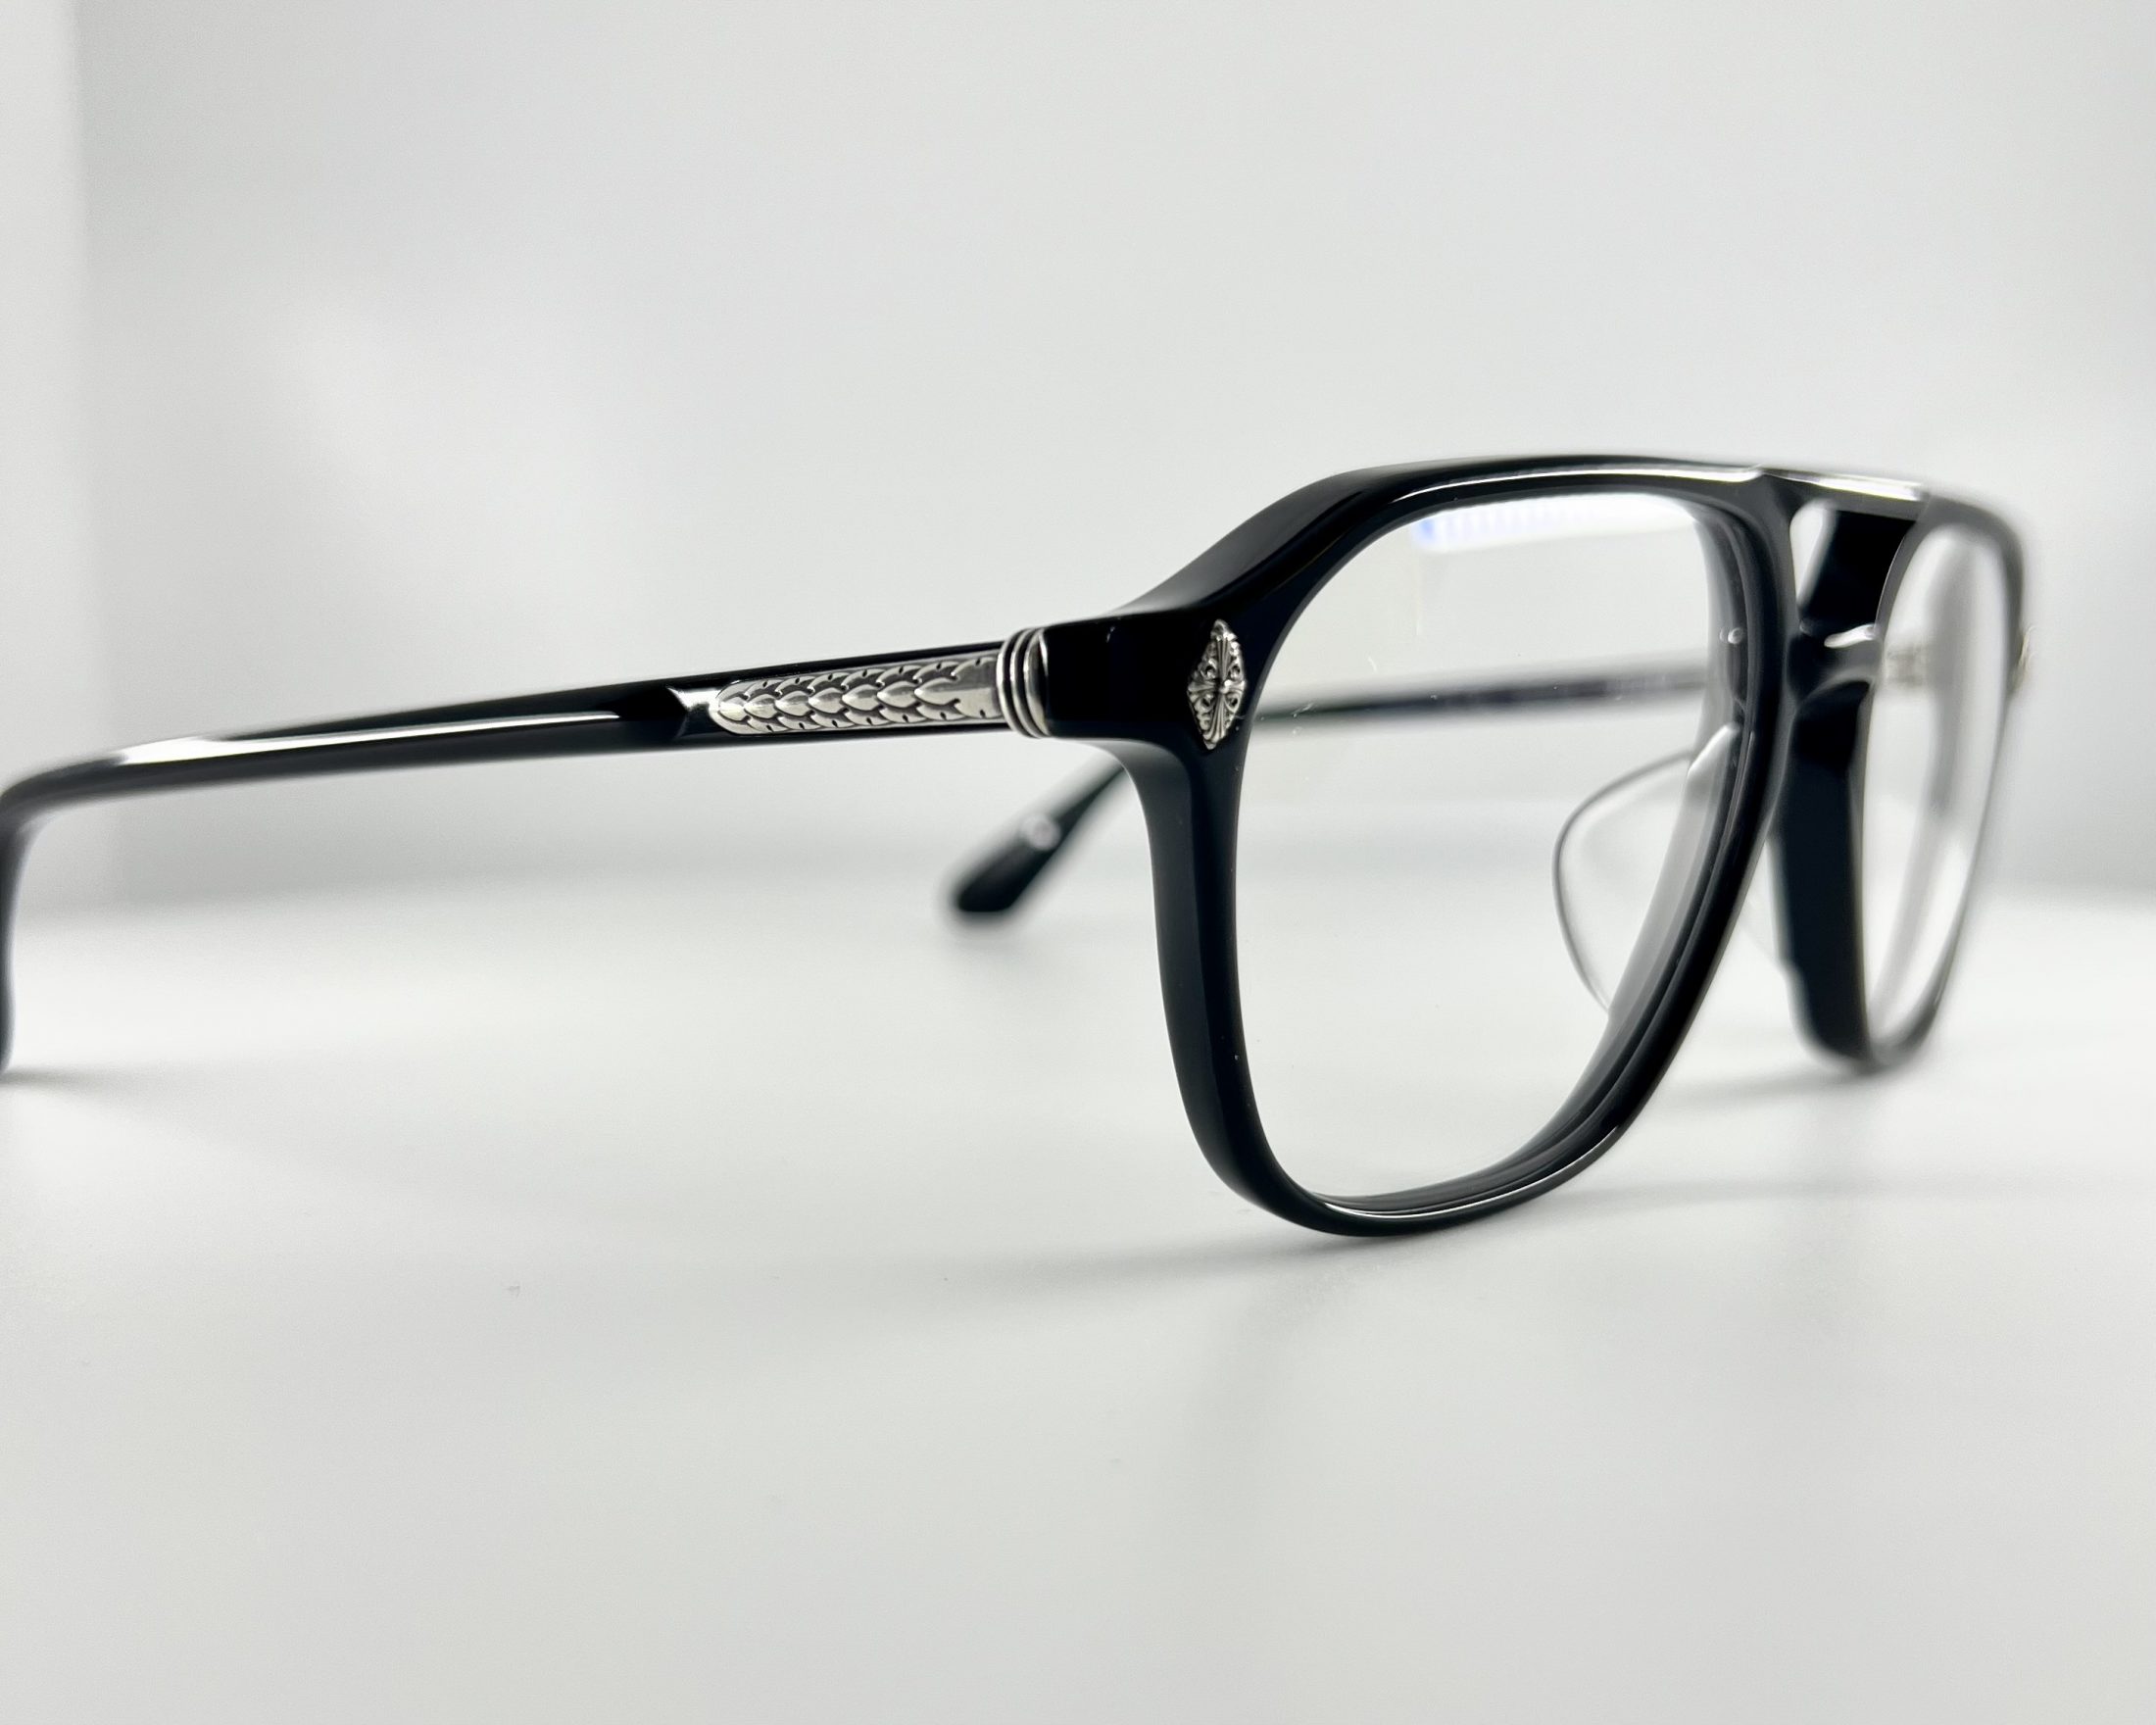 Buy Chrome Hearts Glasses In London Uk Auerbach And Steele Brands Auerbach And Steele